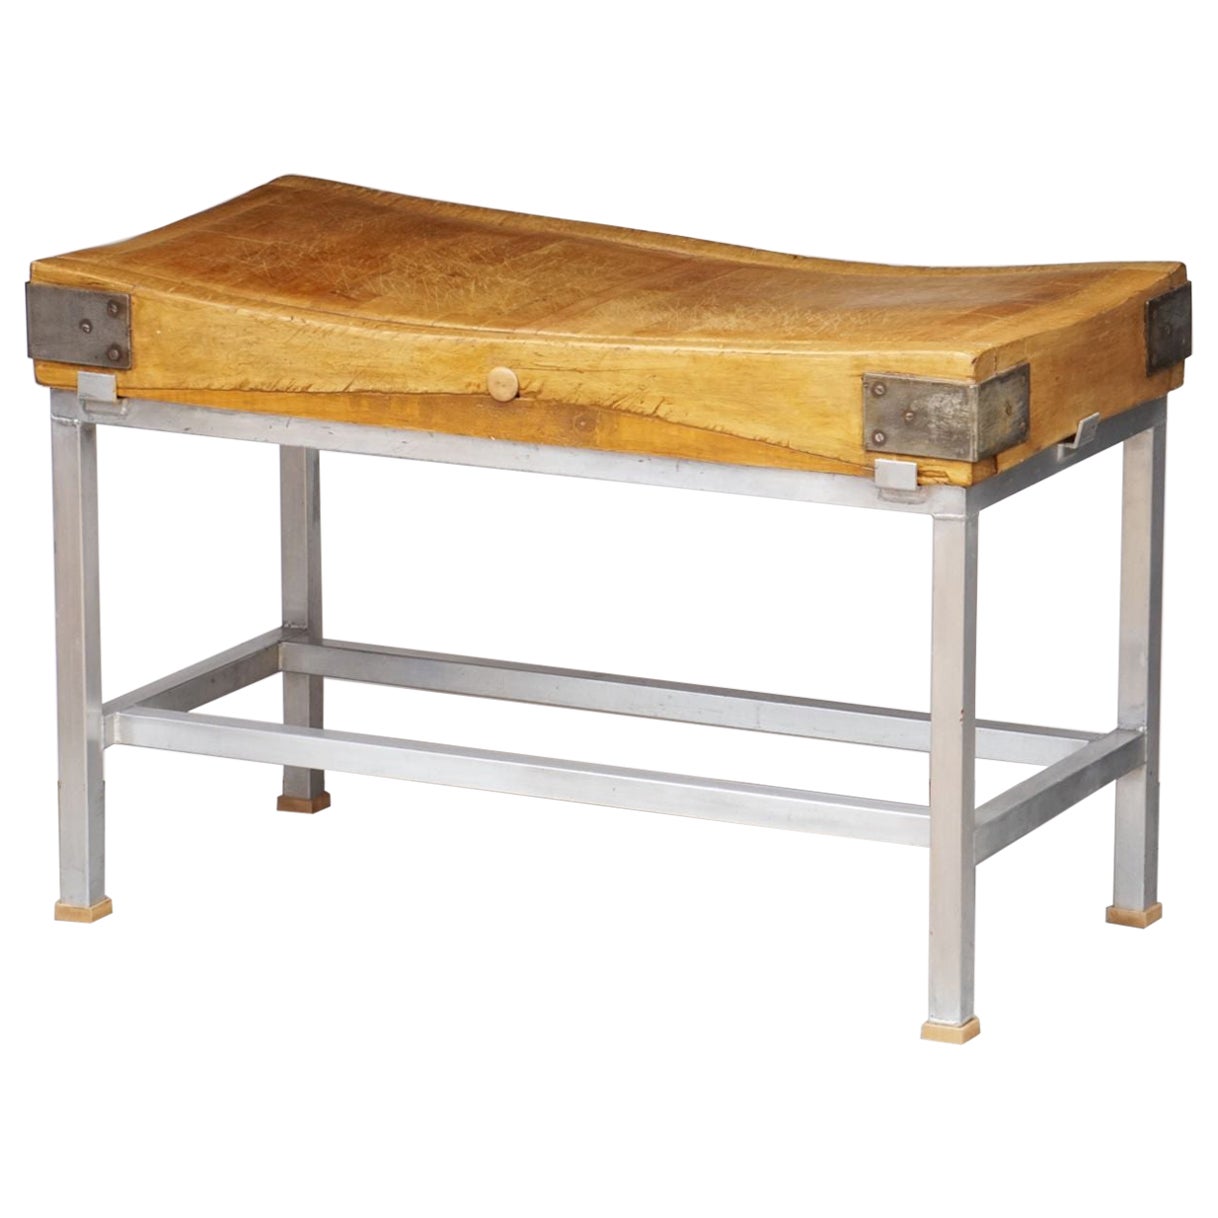 Large Butcher's Chopping Block Table on Stand from England